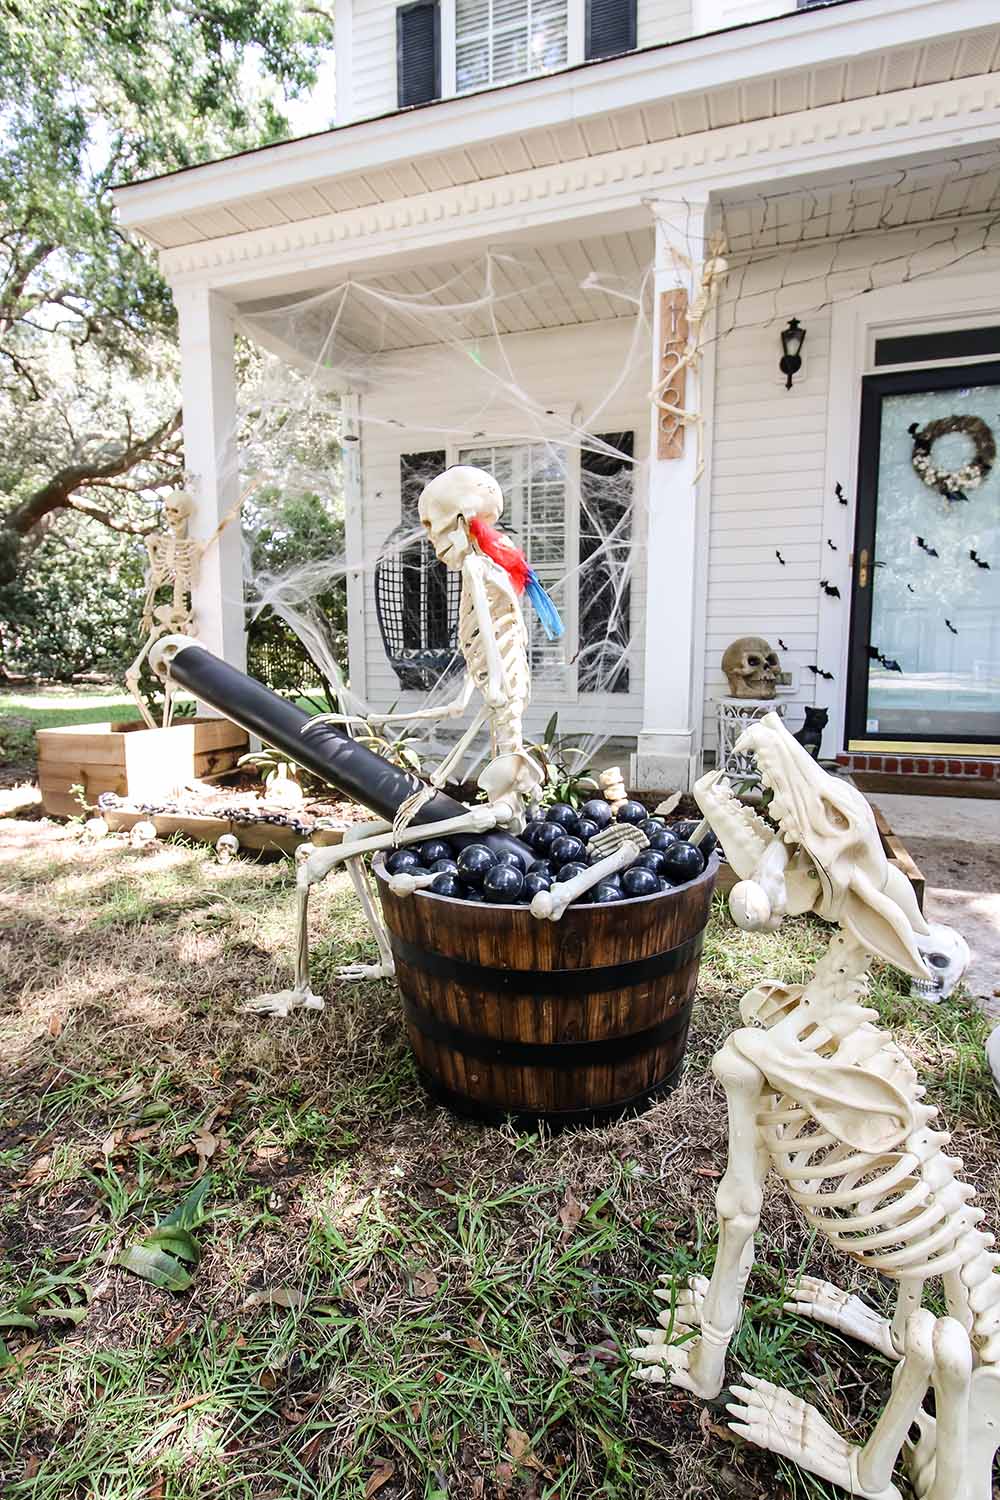 A pirate skeleton sitting in a barrel planter with a cannon and cannon balls.